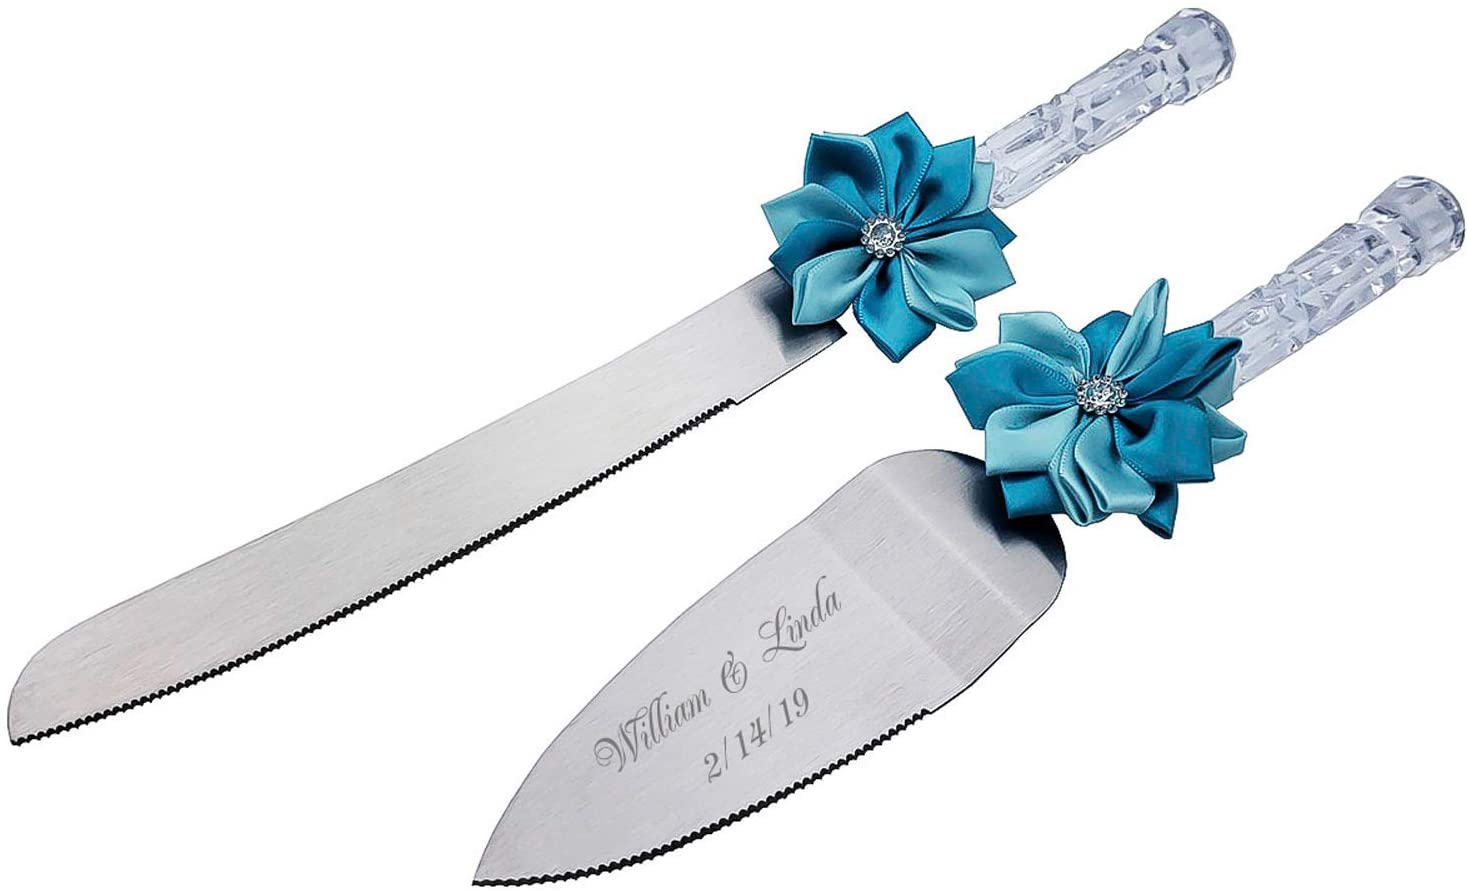 GIFTS INFINITY 12" Personalized Wedding Cake Knife and 10" Server Set Free Engraving (Blue) - Christmas & Halloween Day Gift